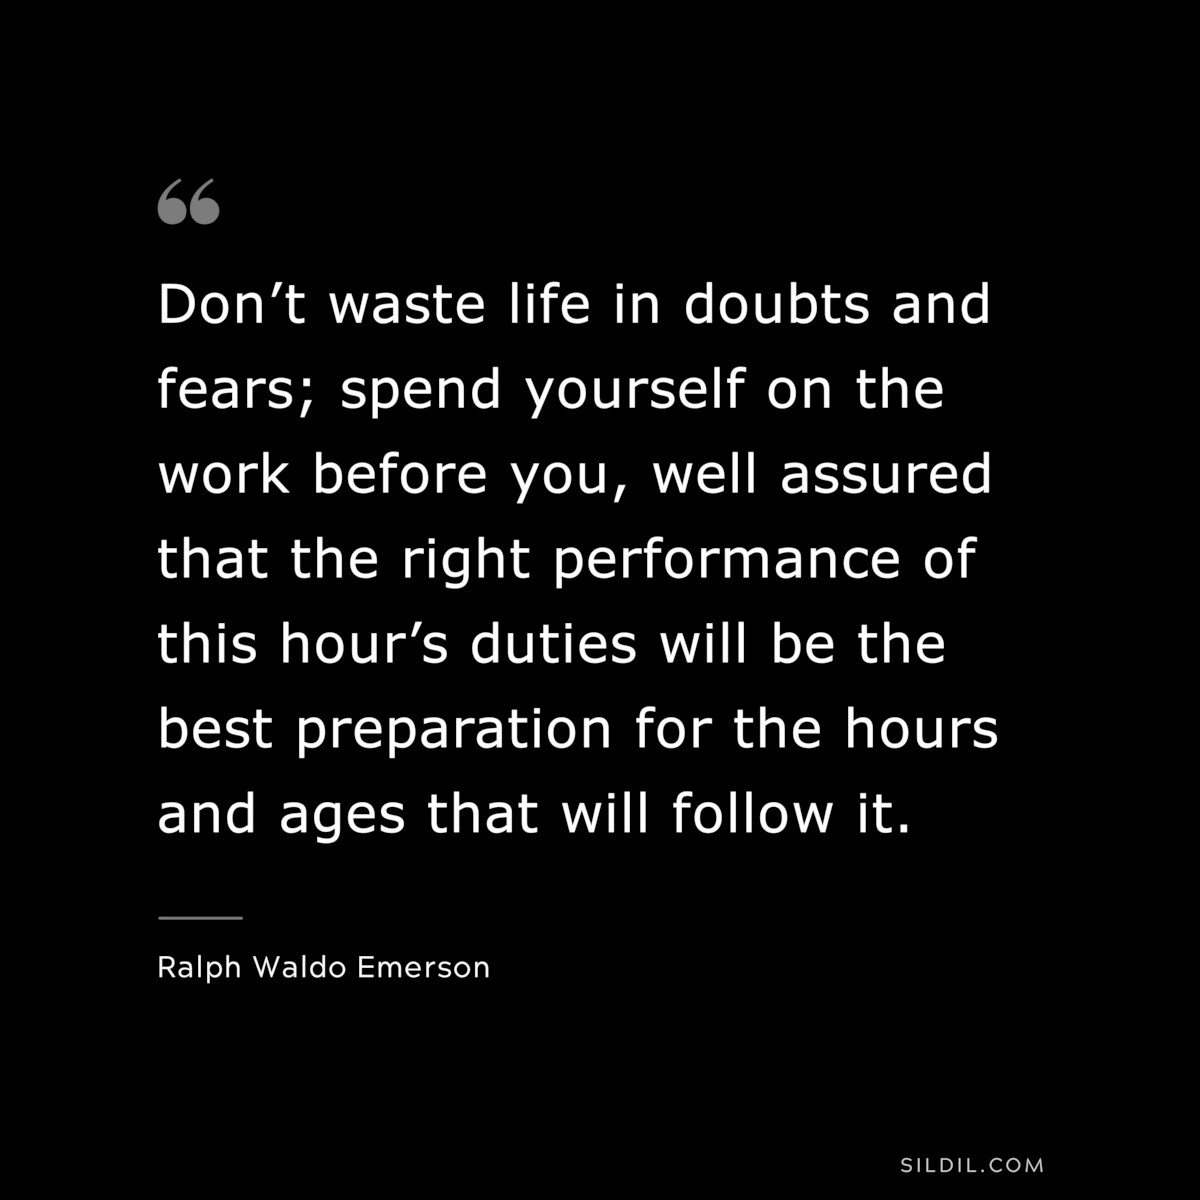 Don’t waste life in doubts and fears; spend yourself on the work before you, well assured that the right performance of this hour’s duties will be the best preparation for the hours and ages that will follow it. — Ralph Waldo Emerson